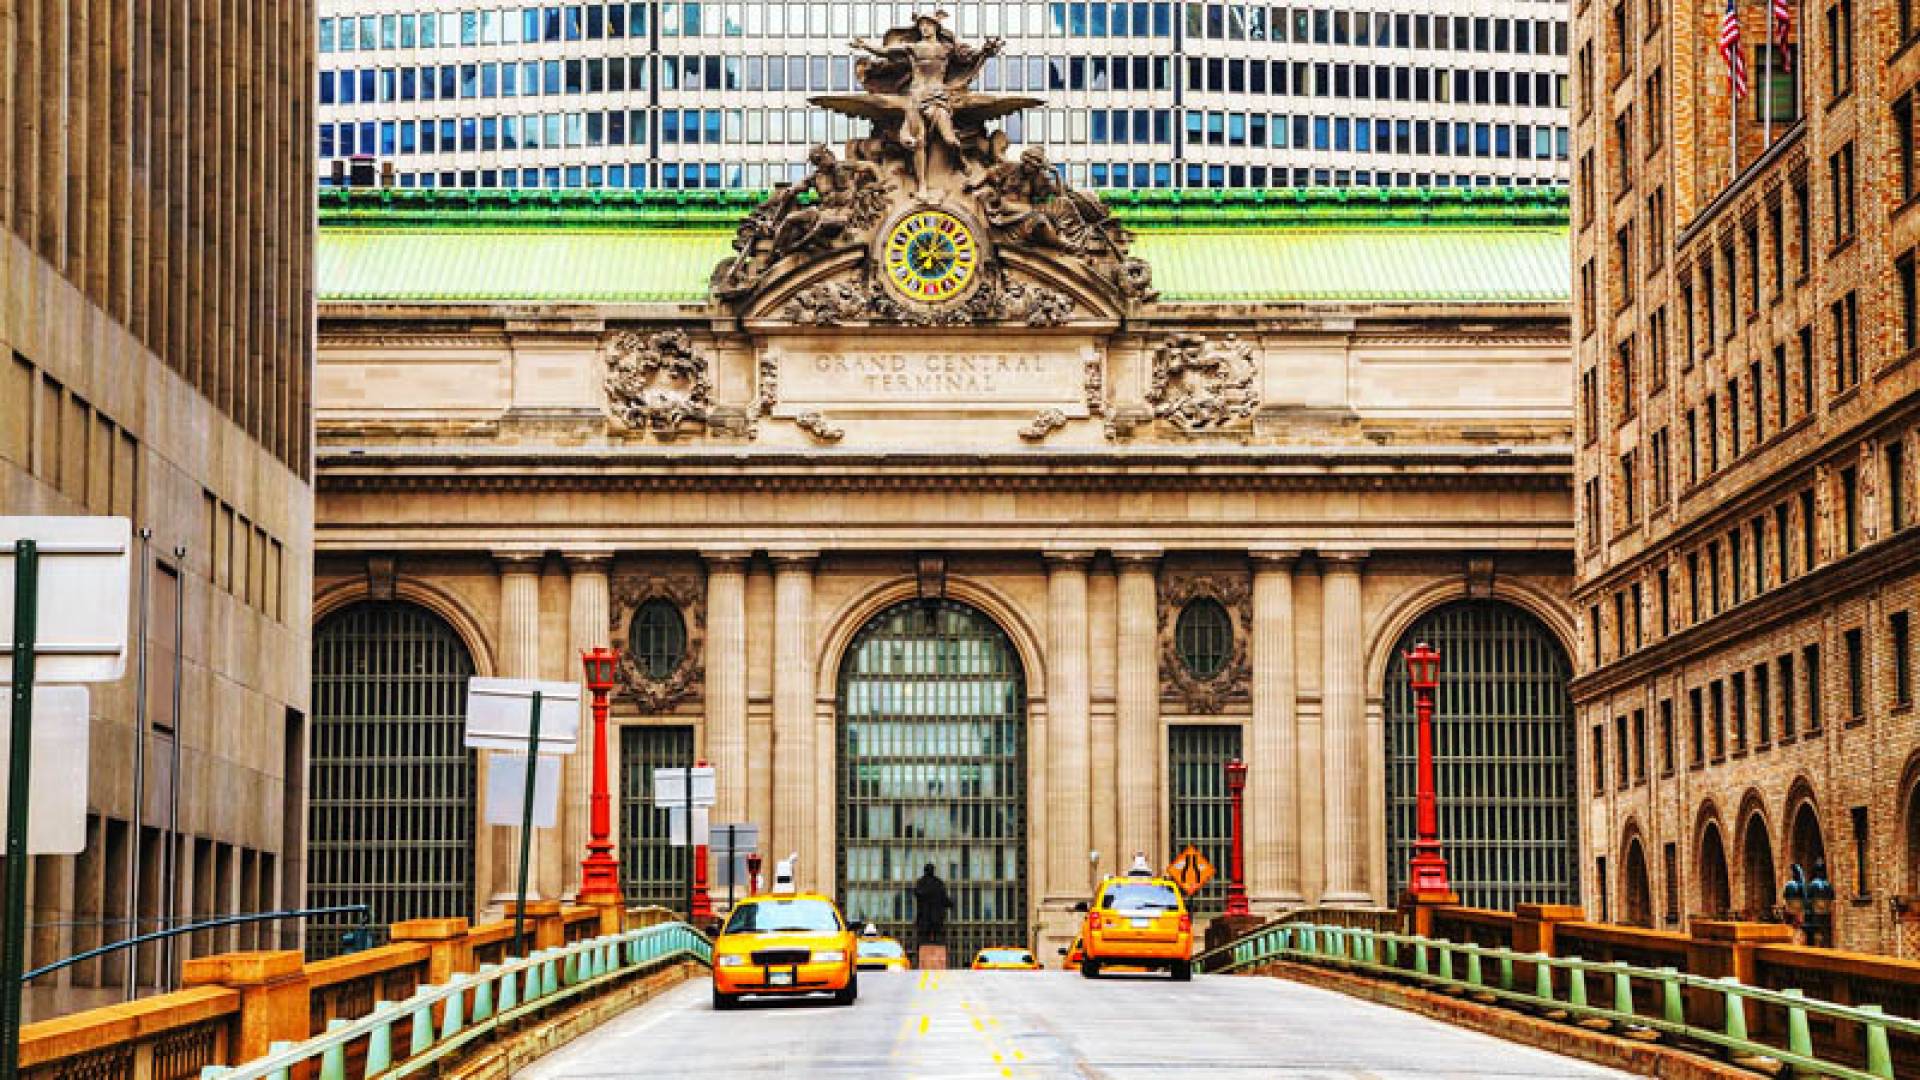 GRAND CENTRAL TERMINAL, First Part